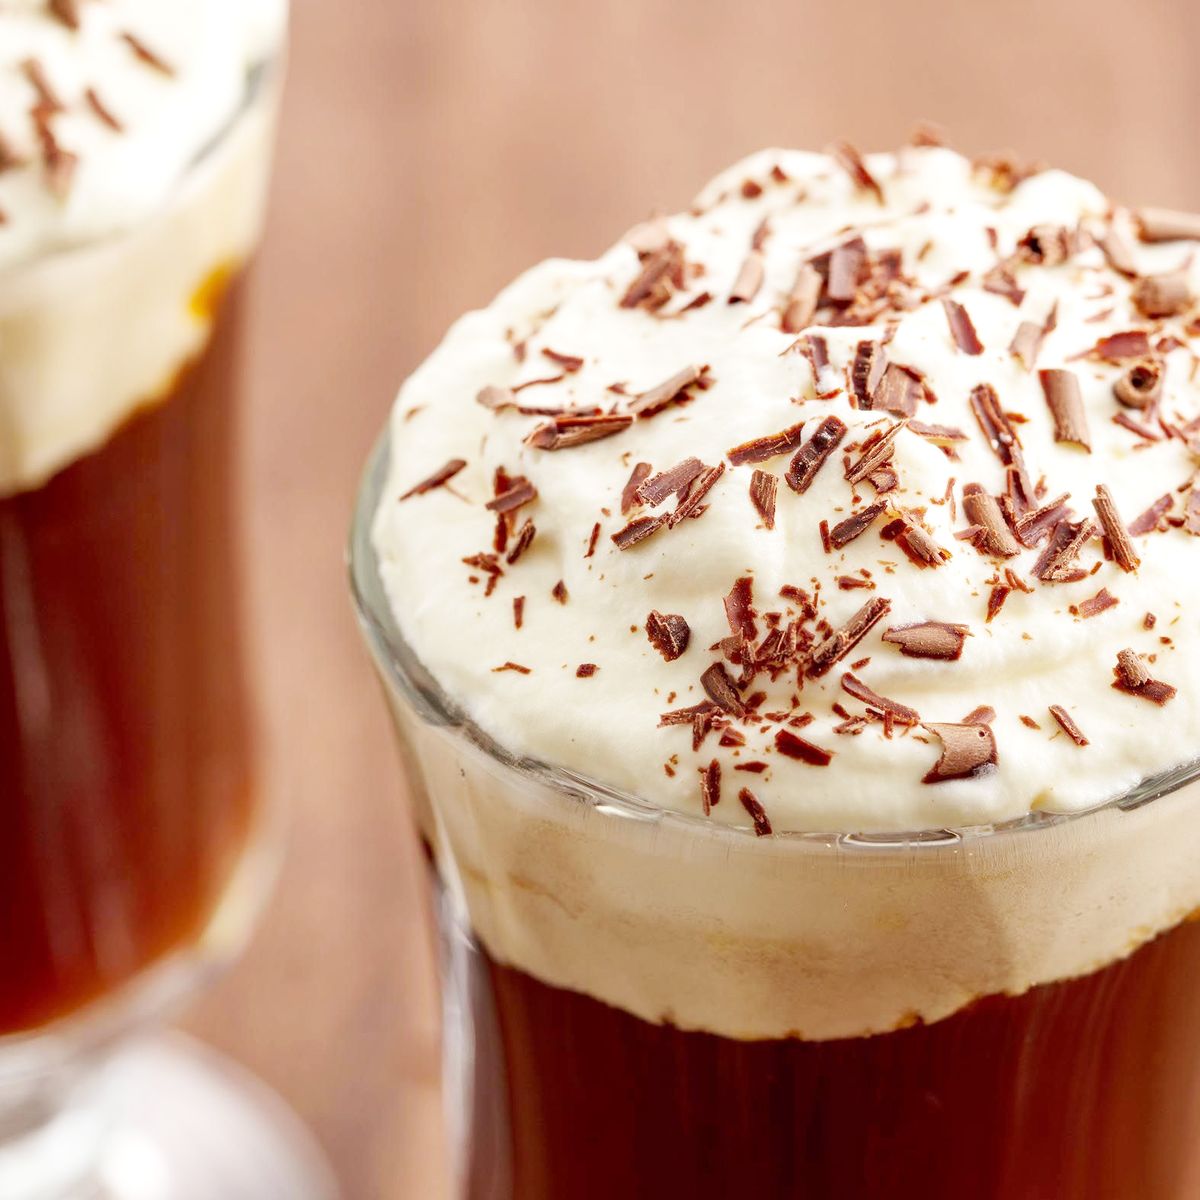 10 Irish Coffee Recipes: From Classic To Creamy To Controversial